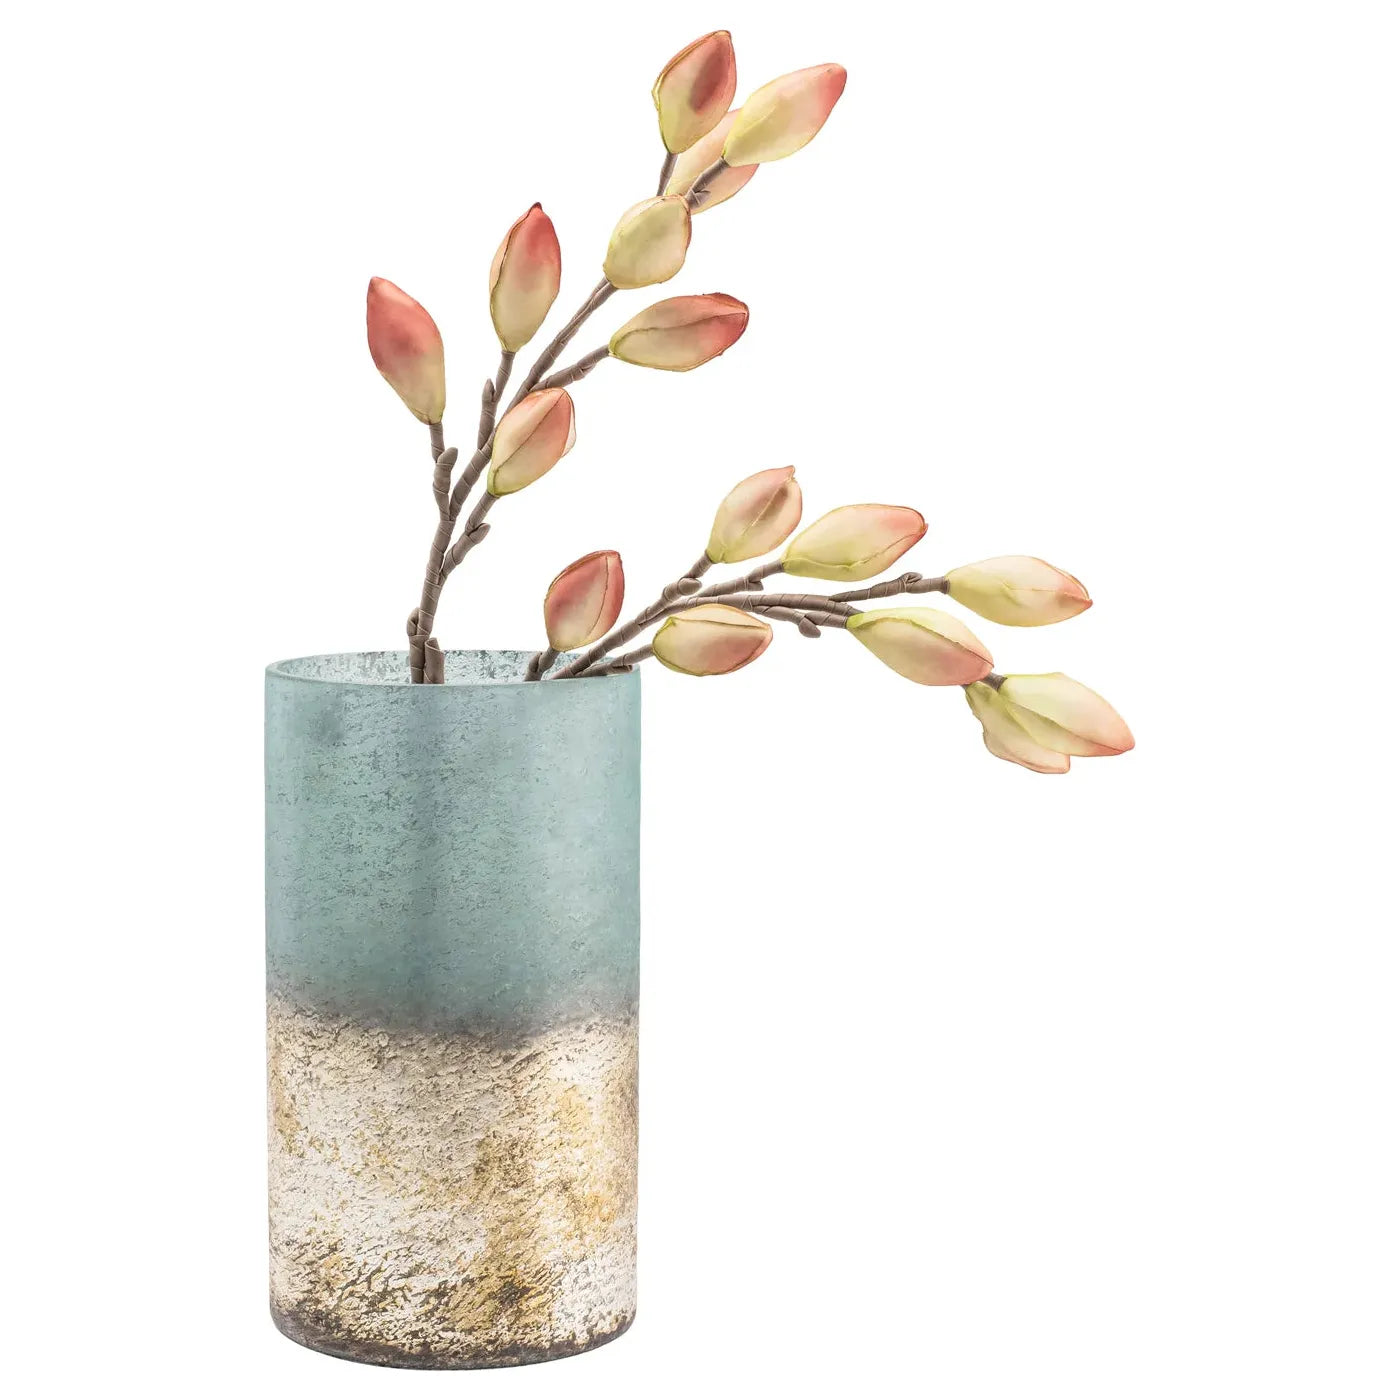 A Cambridge Hurricane Cylinder with a gradient from turquoise at the top to textured gold at the bottom holds a sprig of budding light green flowers with pink tips. This modern, stylish piece showcases a cylindrical form and the flowers delicately lean to the right, creating a graceful arrangement.